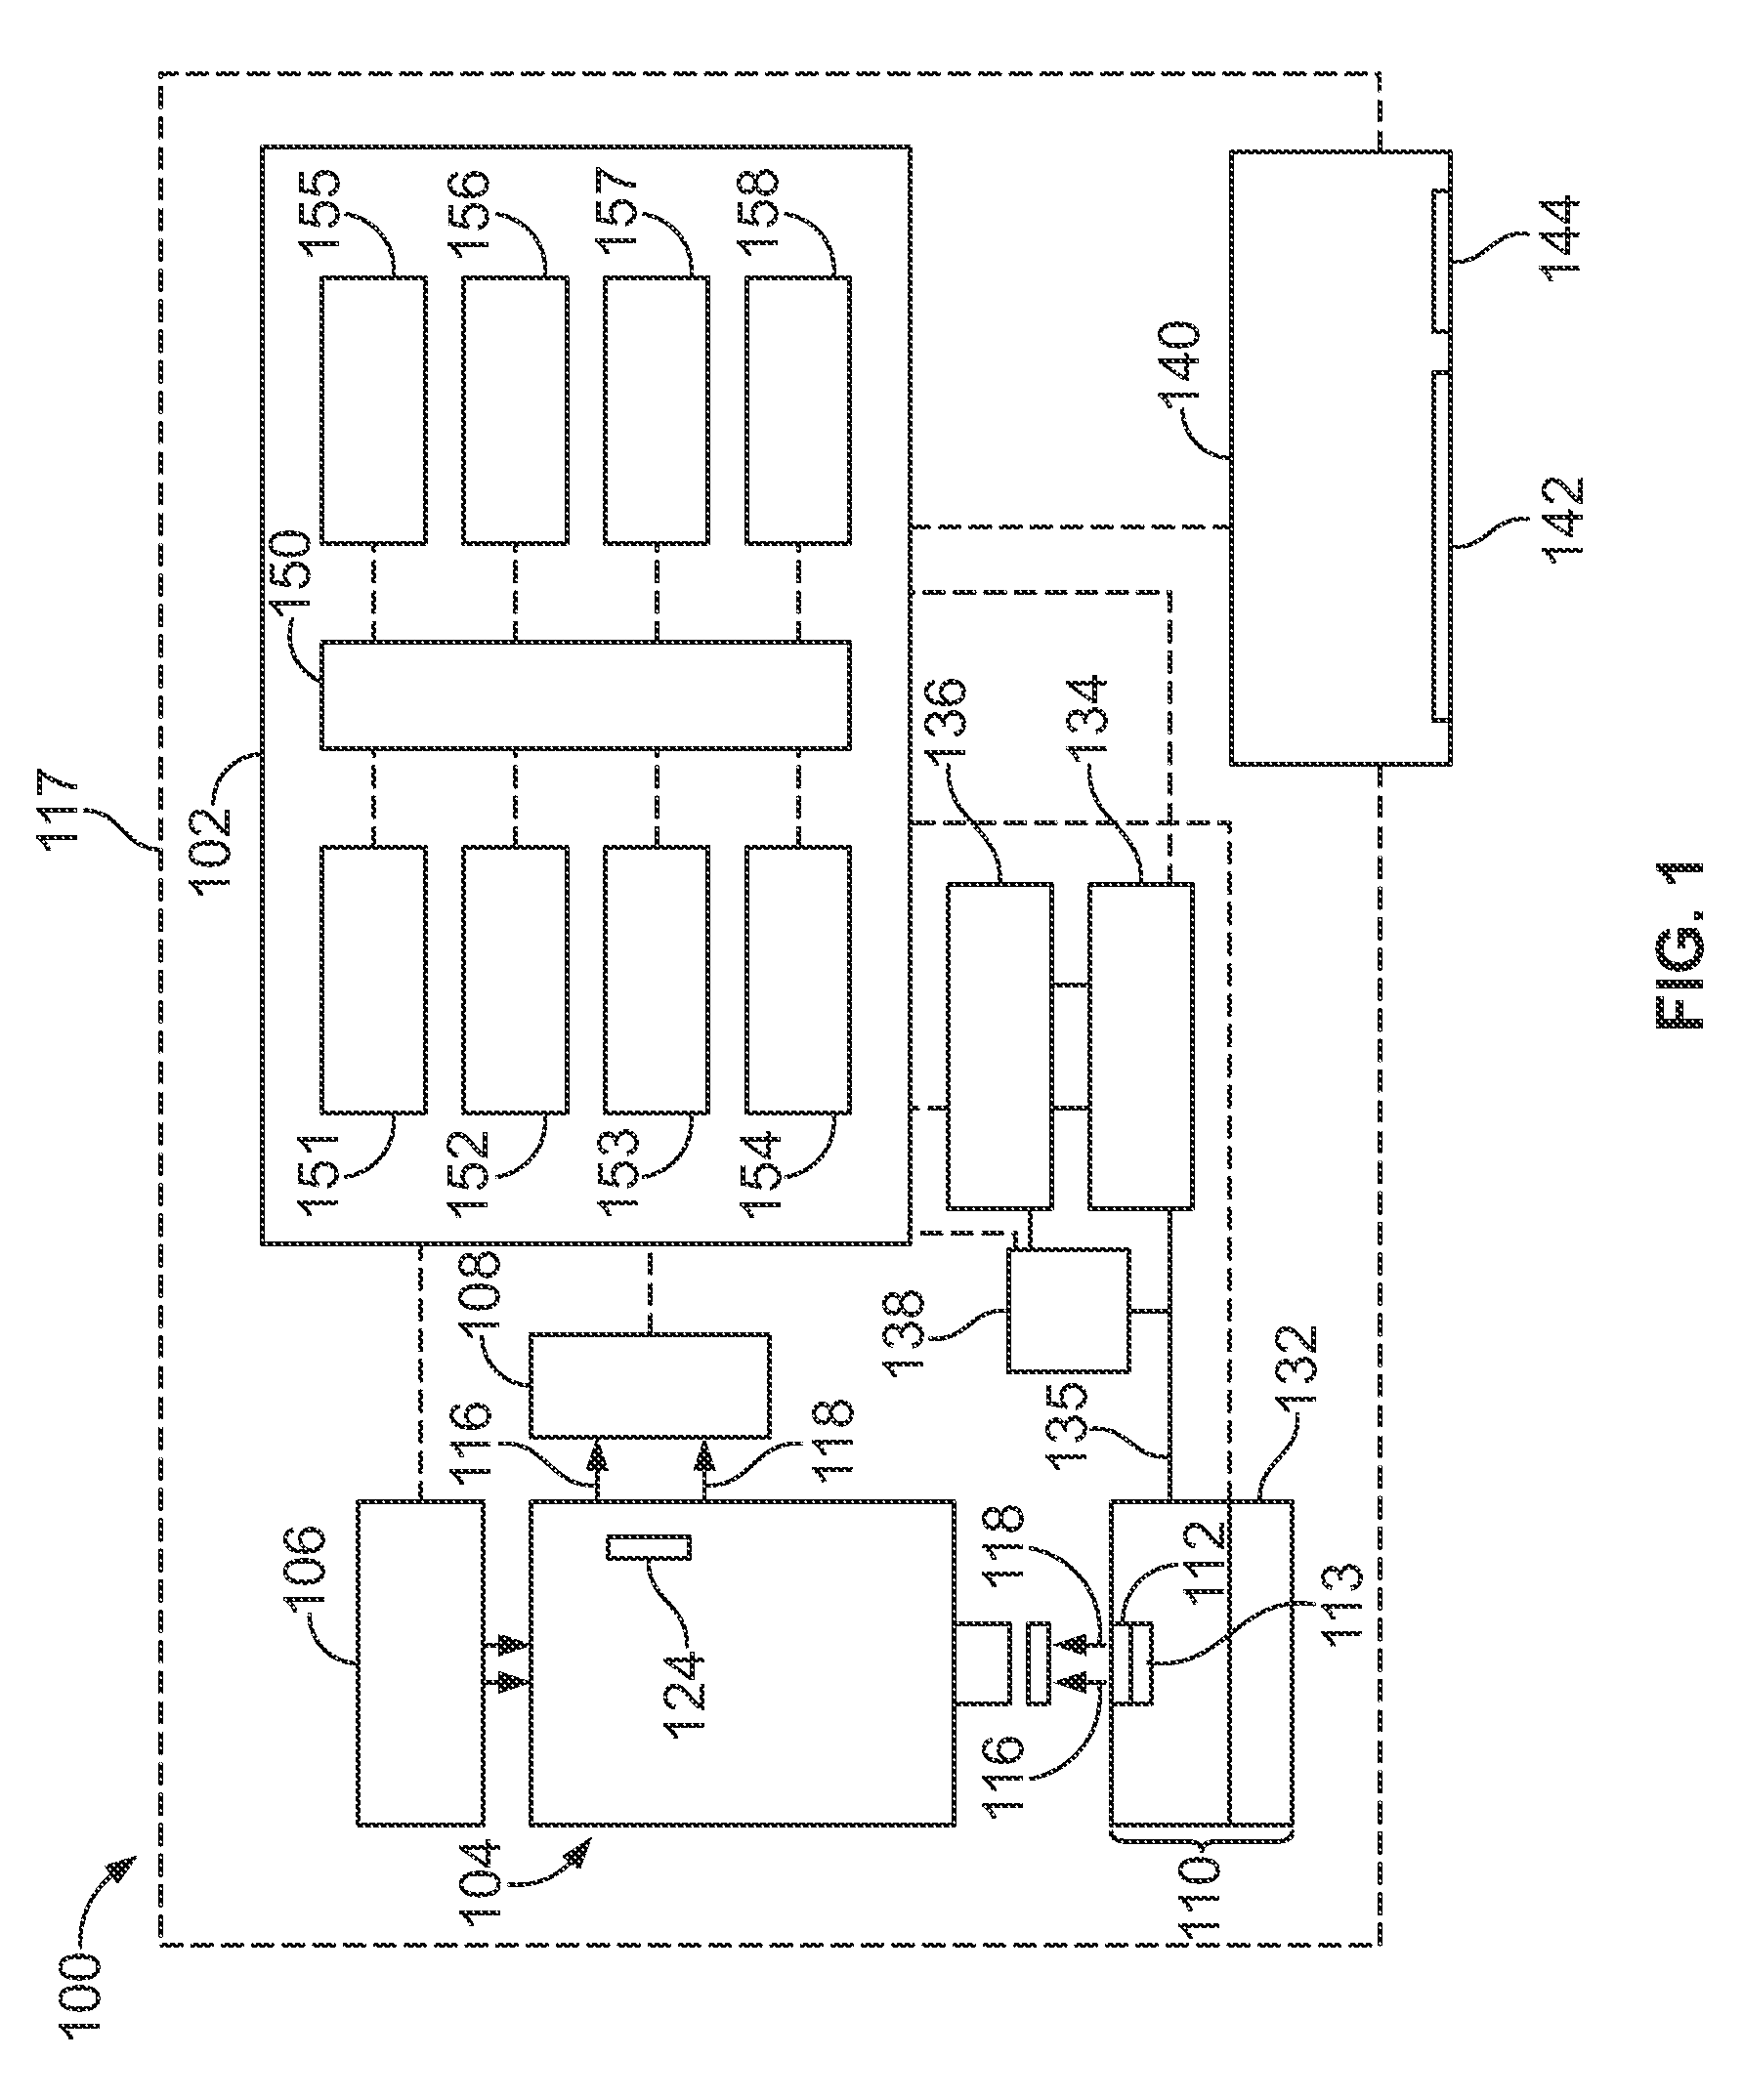 Systems, methods, and apparatuses to image a sample for biological or chemical analysis